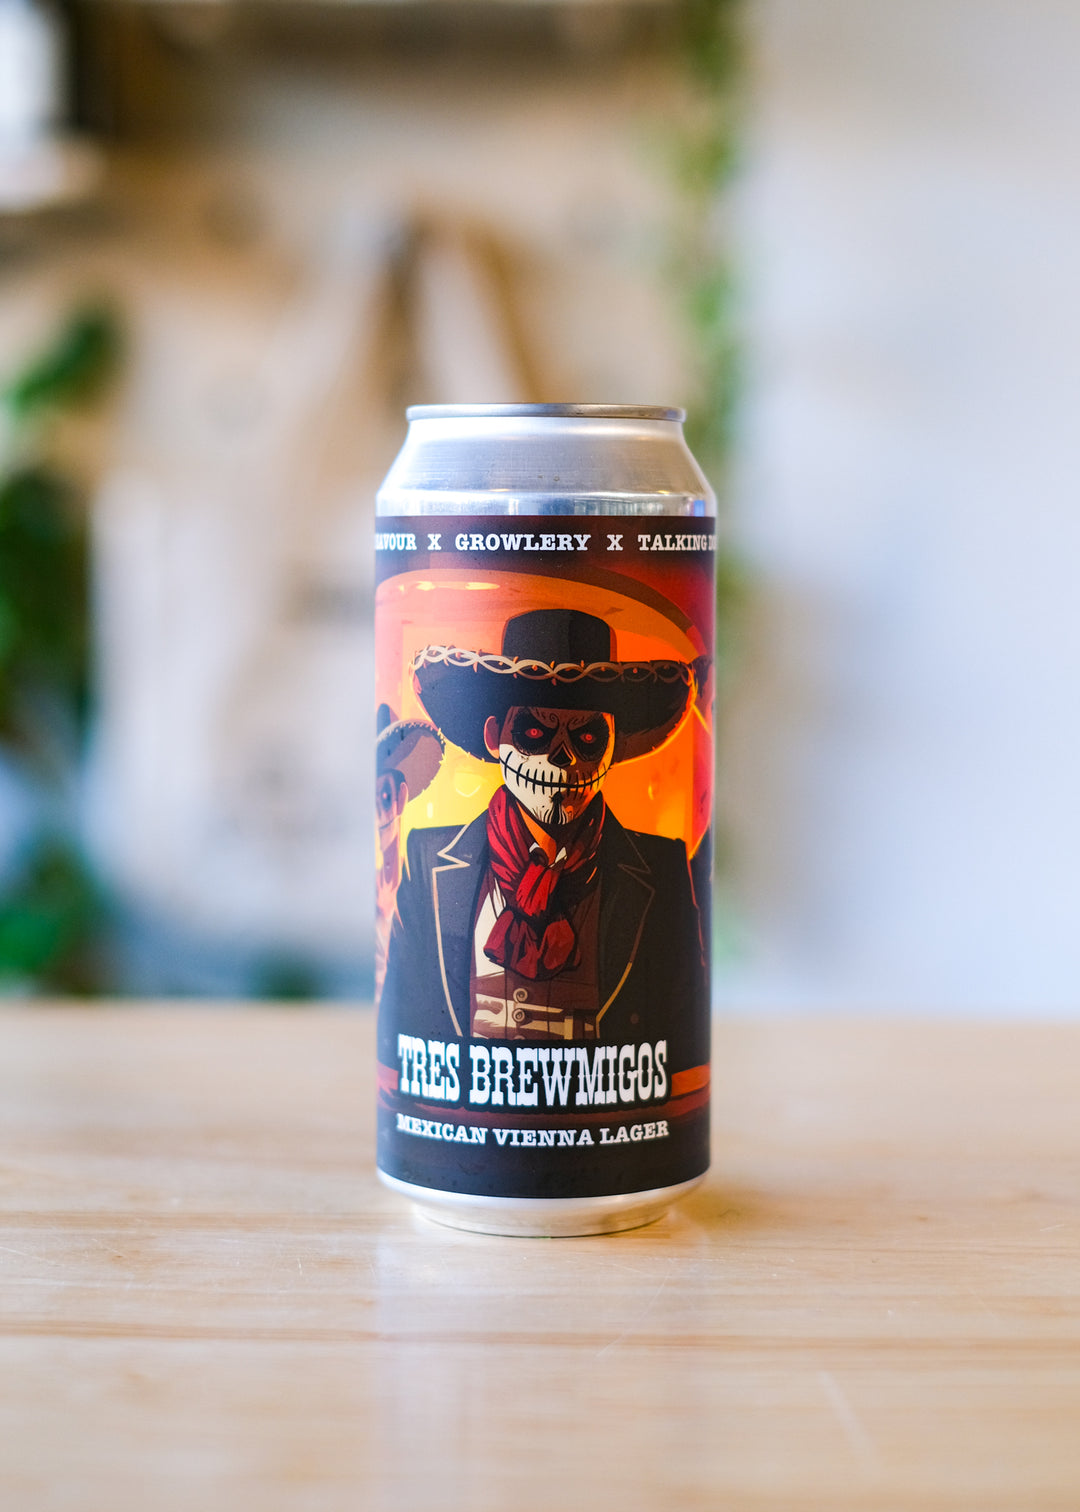 TRES BREWMIGOS | Mexican Vienna Lager(Collab w/ The Growlery & Talking Dog)